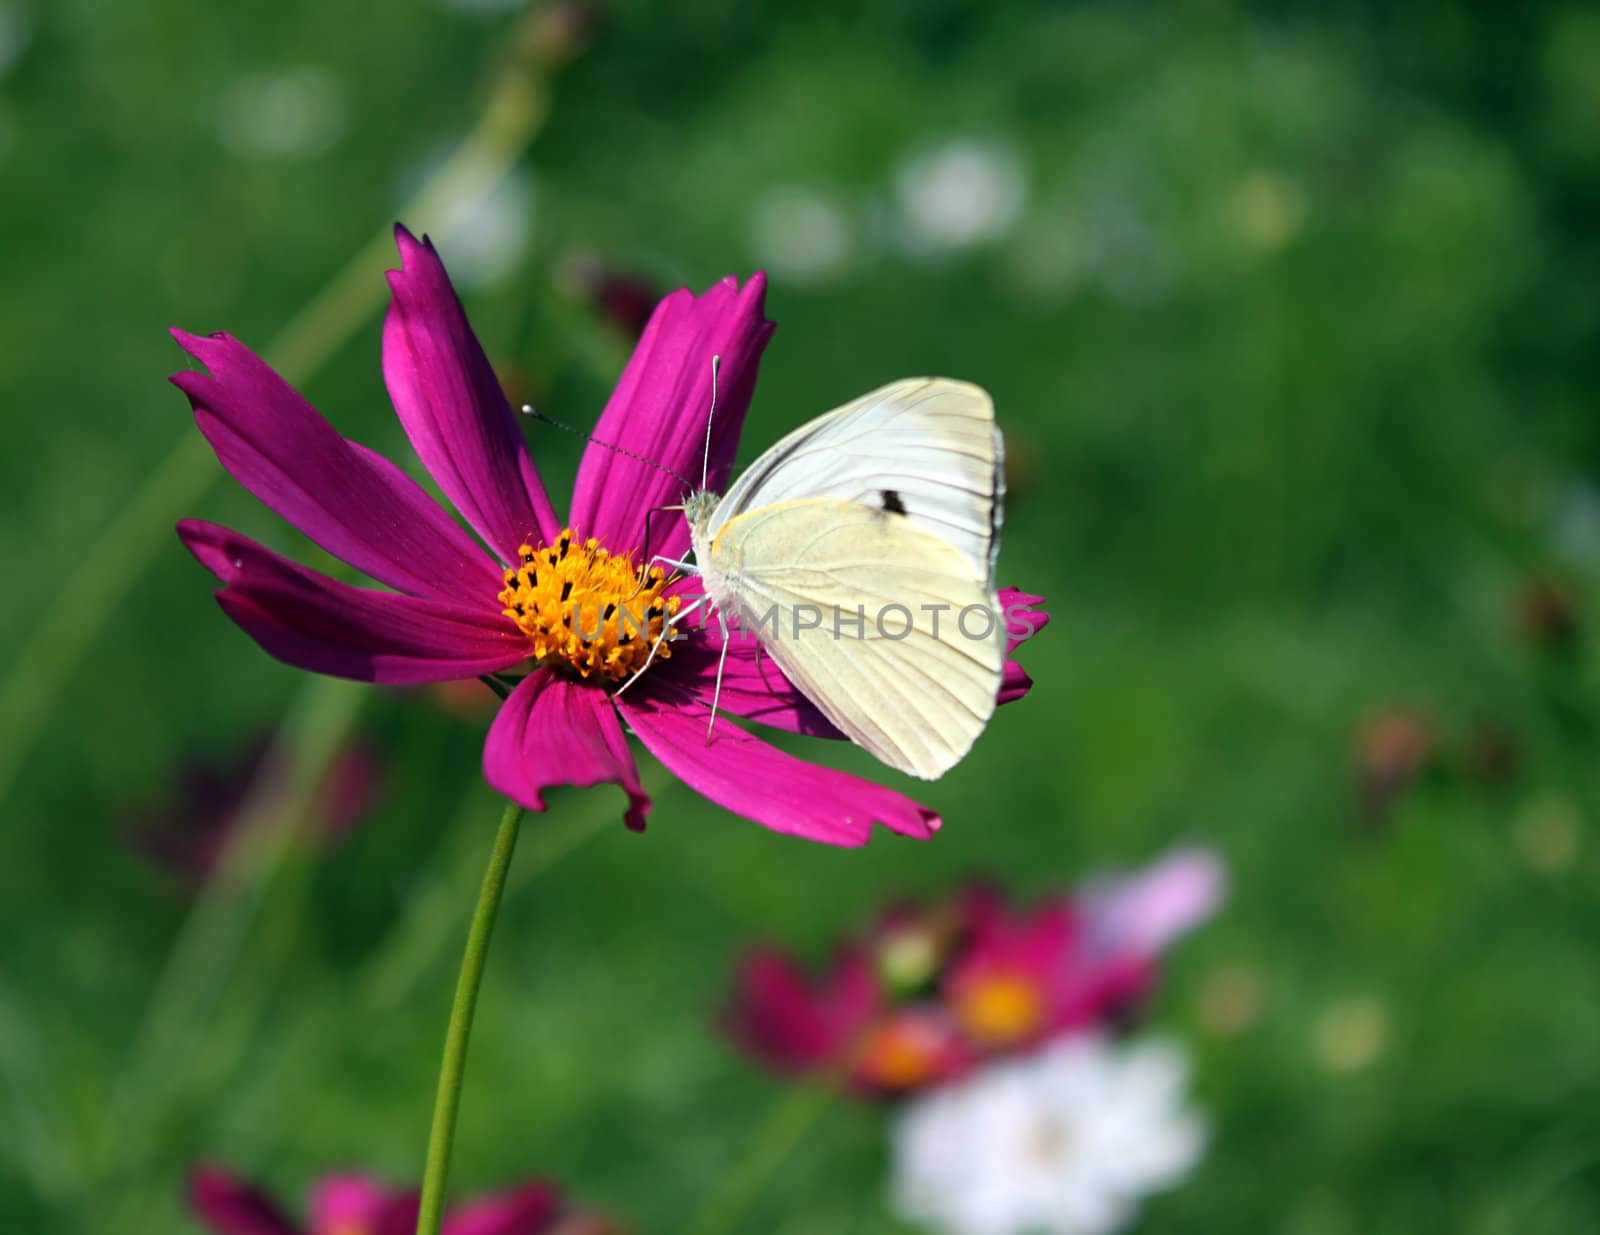 white cabbage butterfly on flower (cosmos)